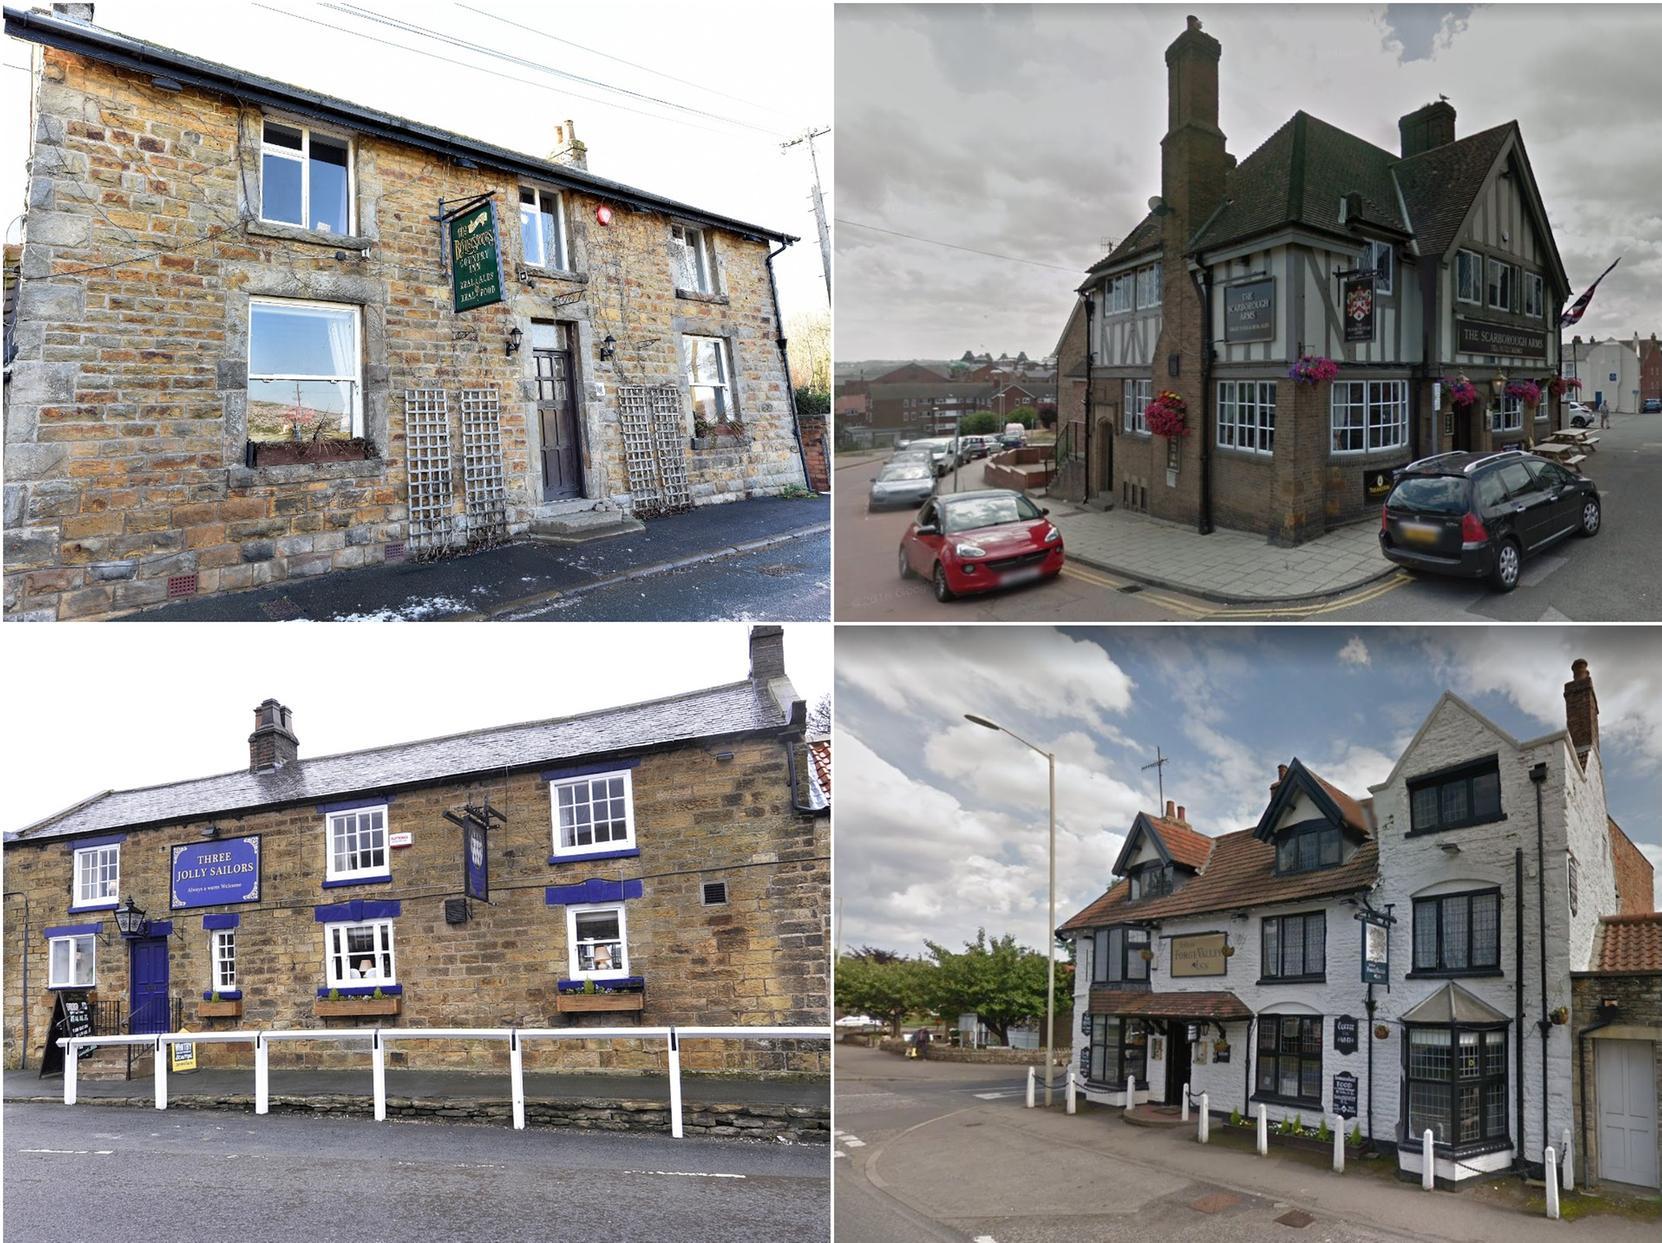 The top four best pubs for food in Scarborough according to Trip Advisor reviews.